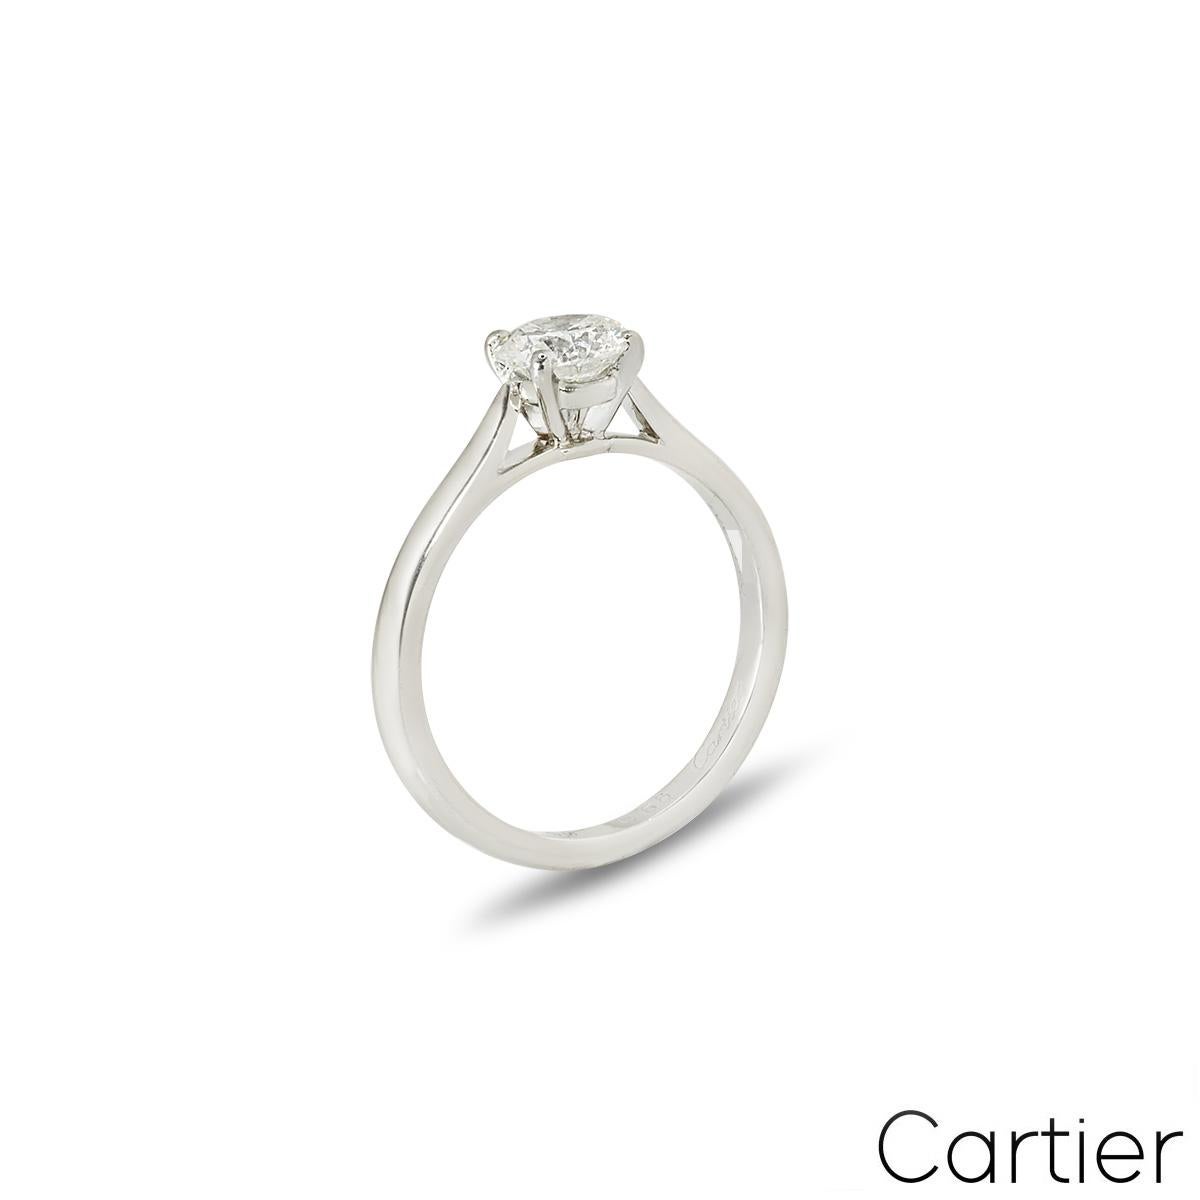 A lovely platinum diamond engagement ring by Cartier from the Solitaire 1895 collection. The ring comprises of a round brilliant cut diamond in a four prong setting weighing 0.68ct, G colour and VS1 clarity. The 2mm ring has a gross weight of 3.72